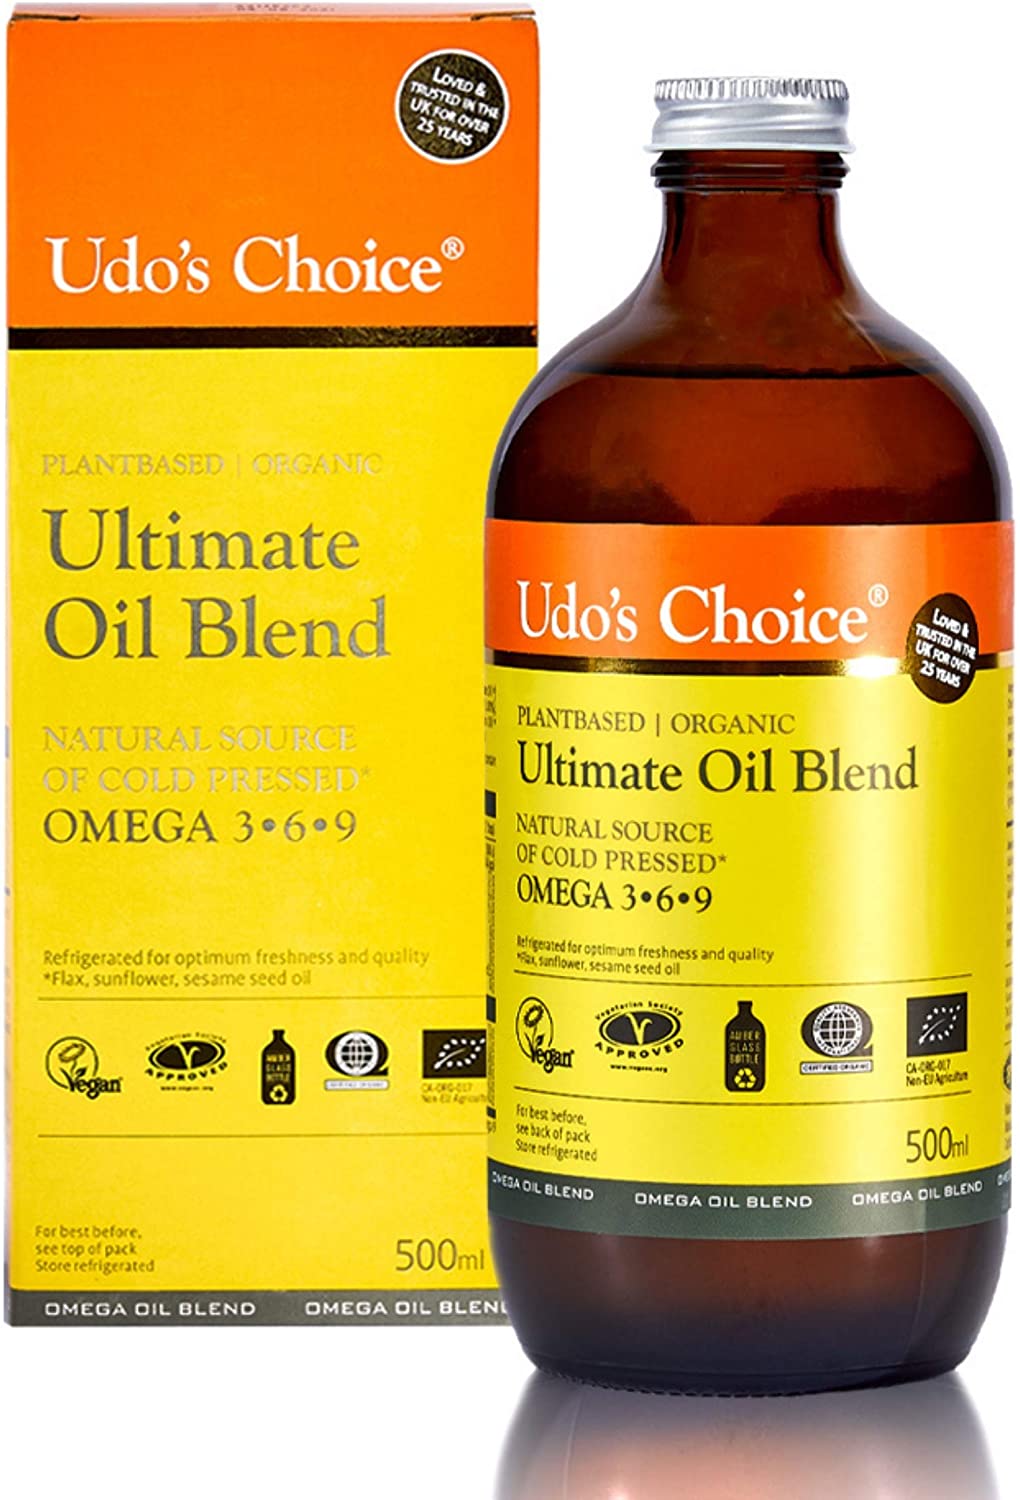 Udos Choice Ultimate Oil Blend Organic 500ml